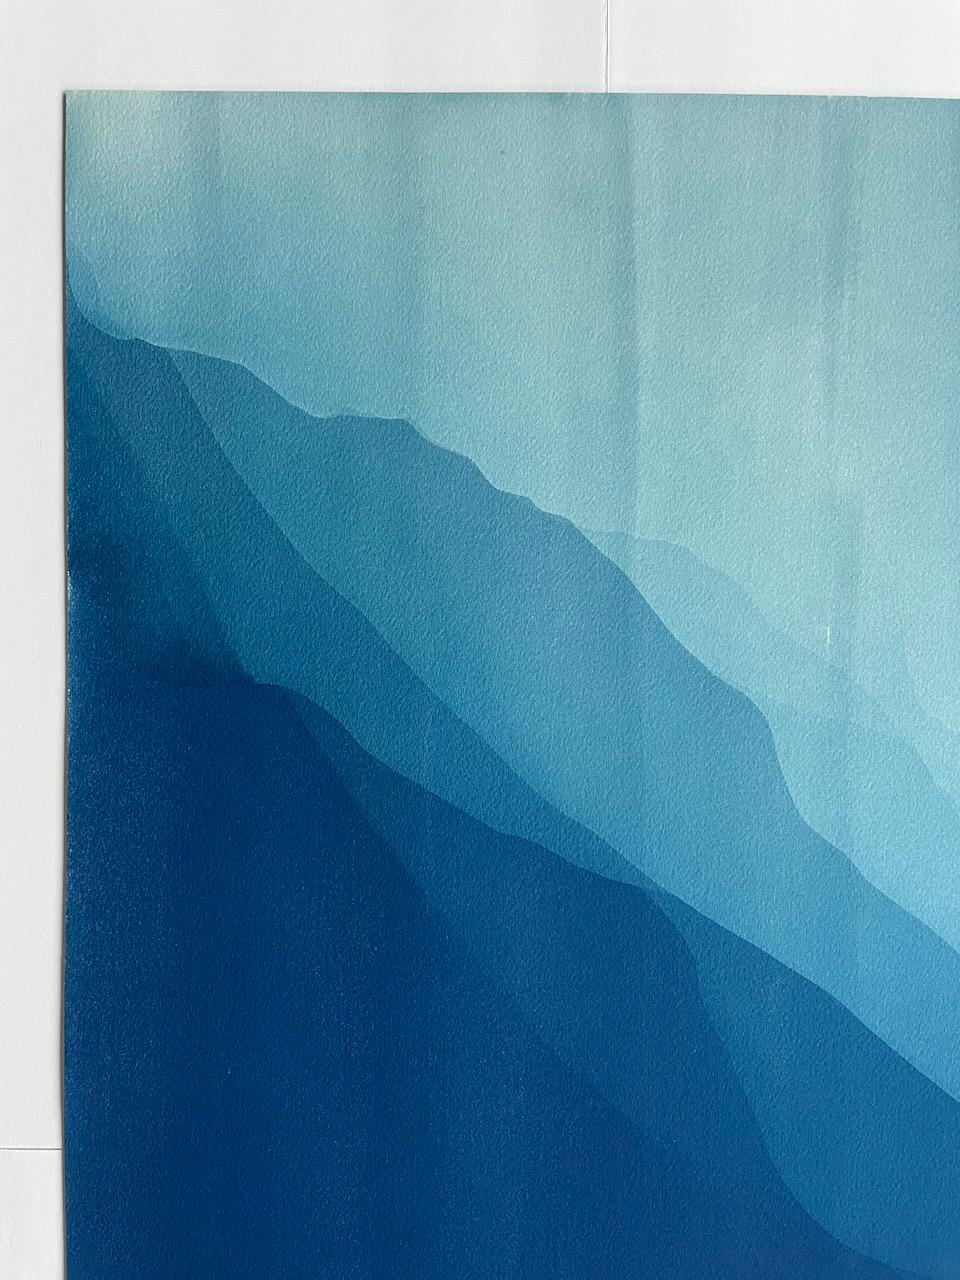 Sea Cliffs 6 (Hand-printed 40 x 20 inch abstract cyanotype) For Sale 3